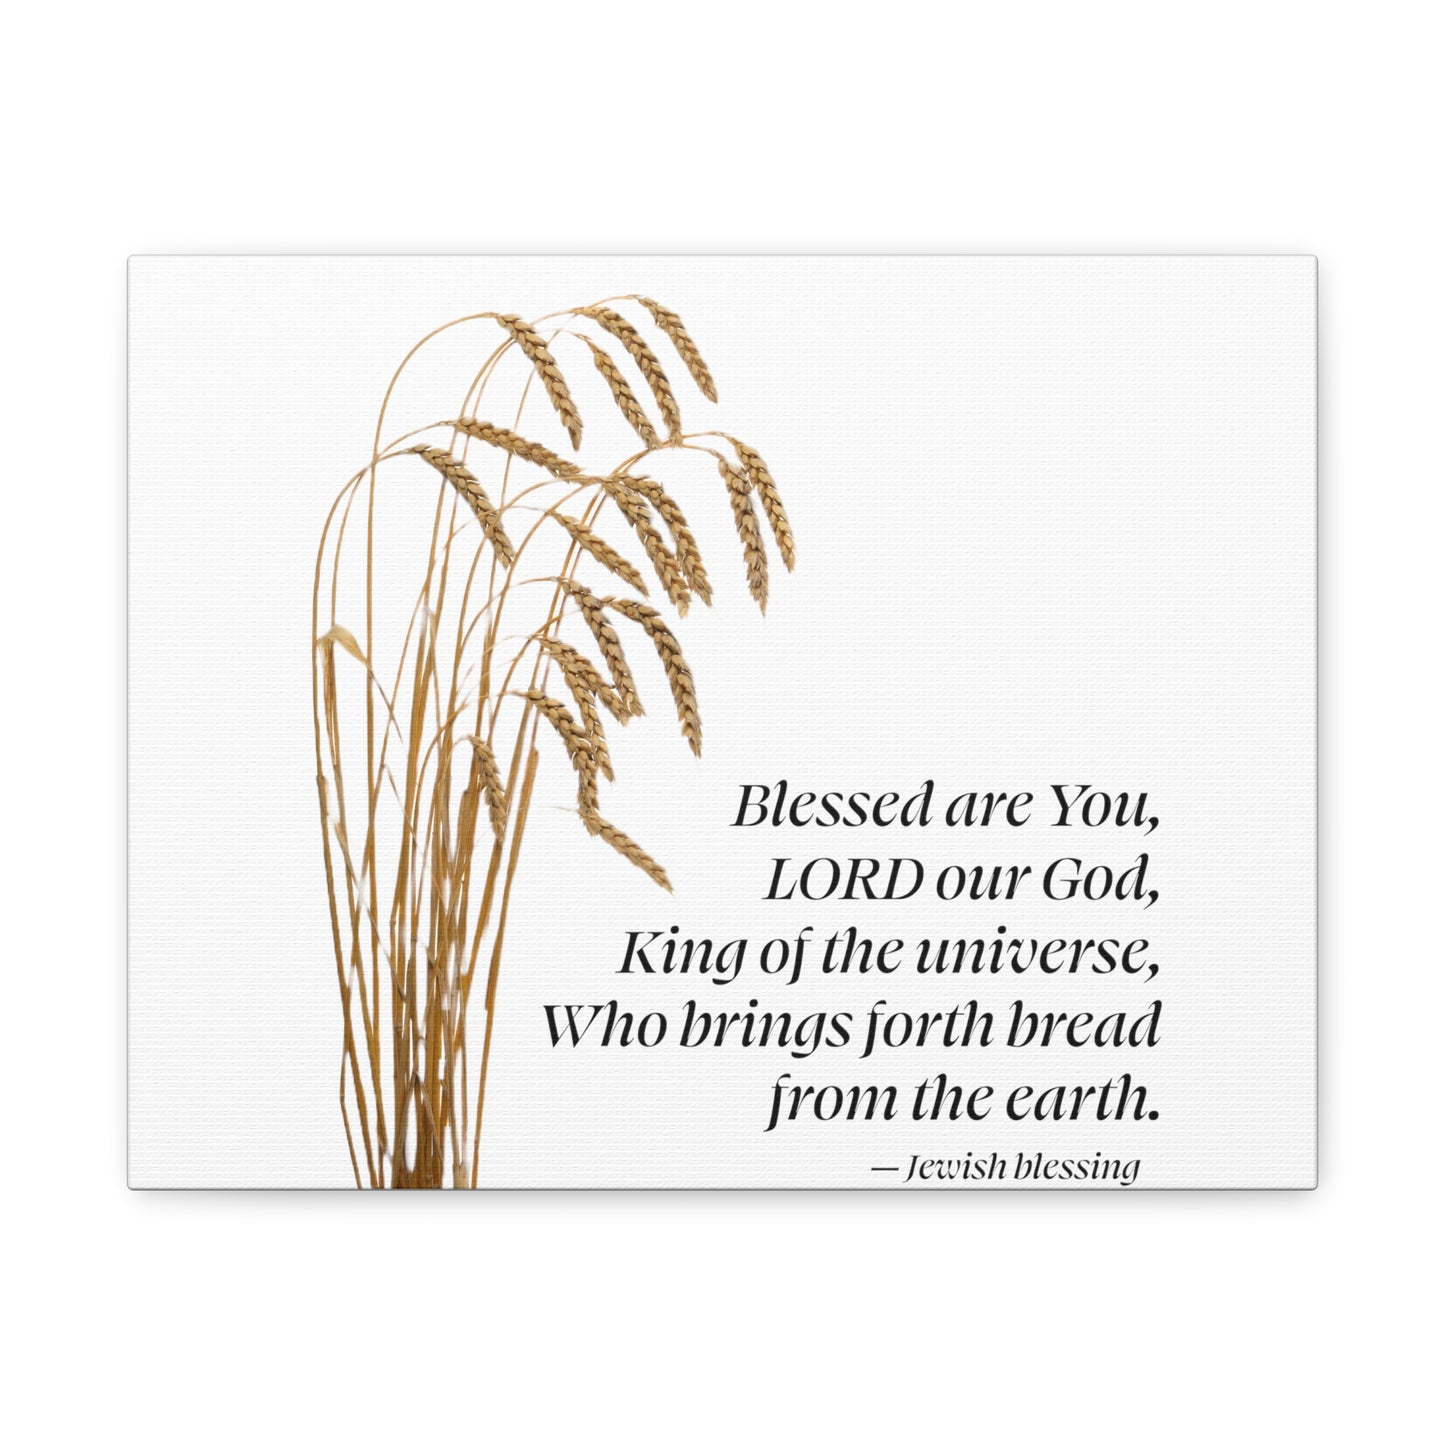 Canvas Gallery Wraps - Blessed Are You, LORD our God, King of the Universe